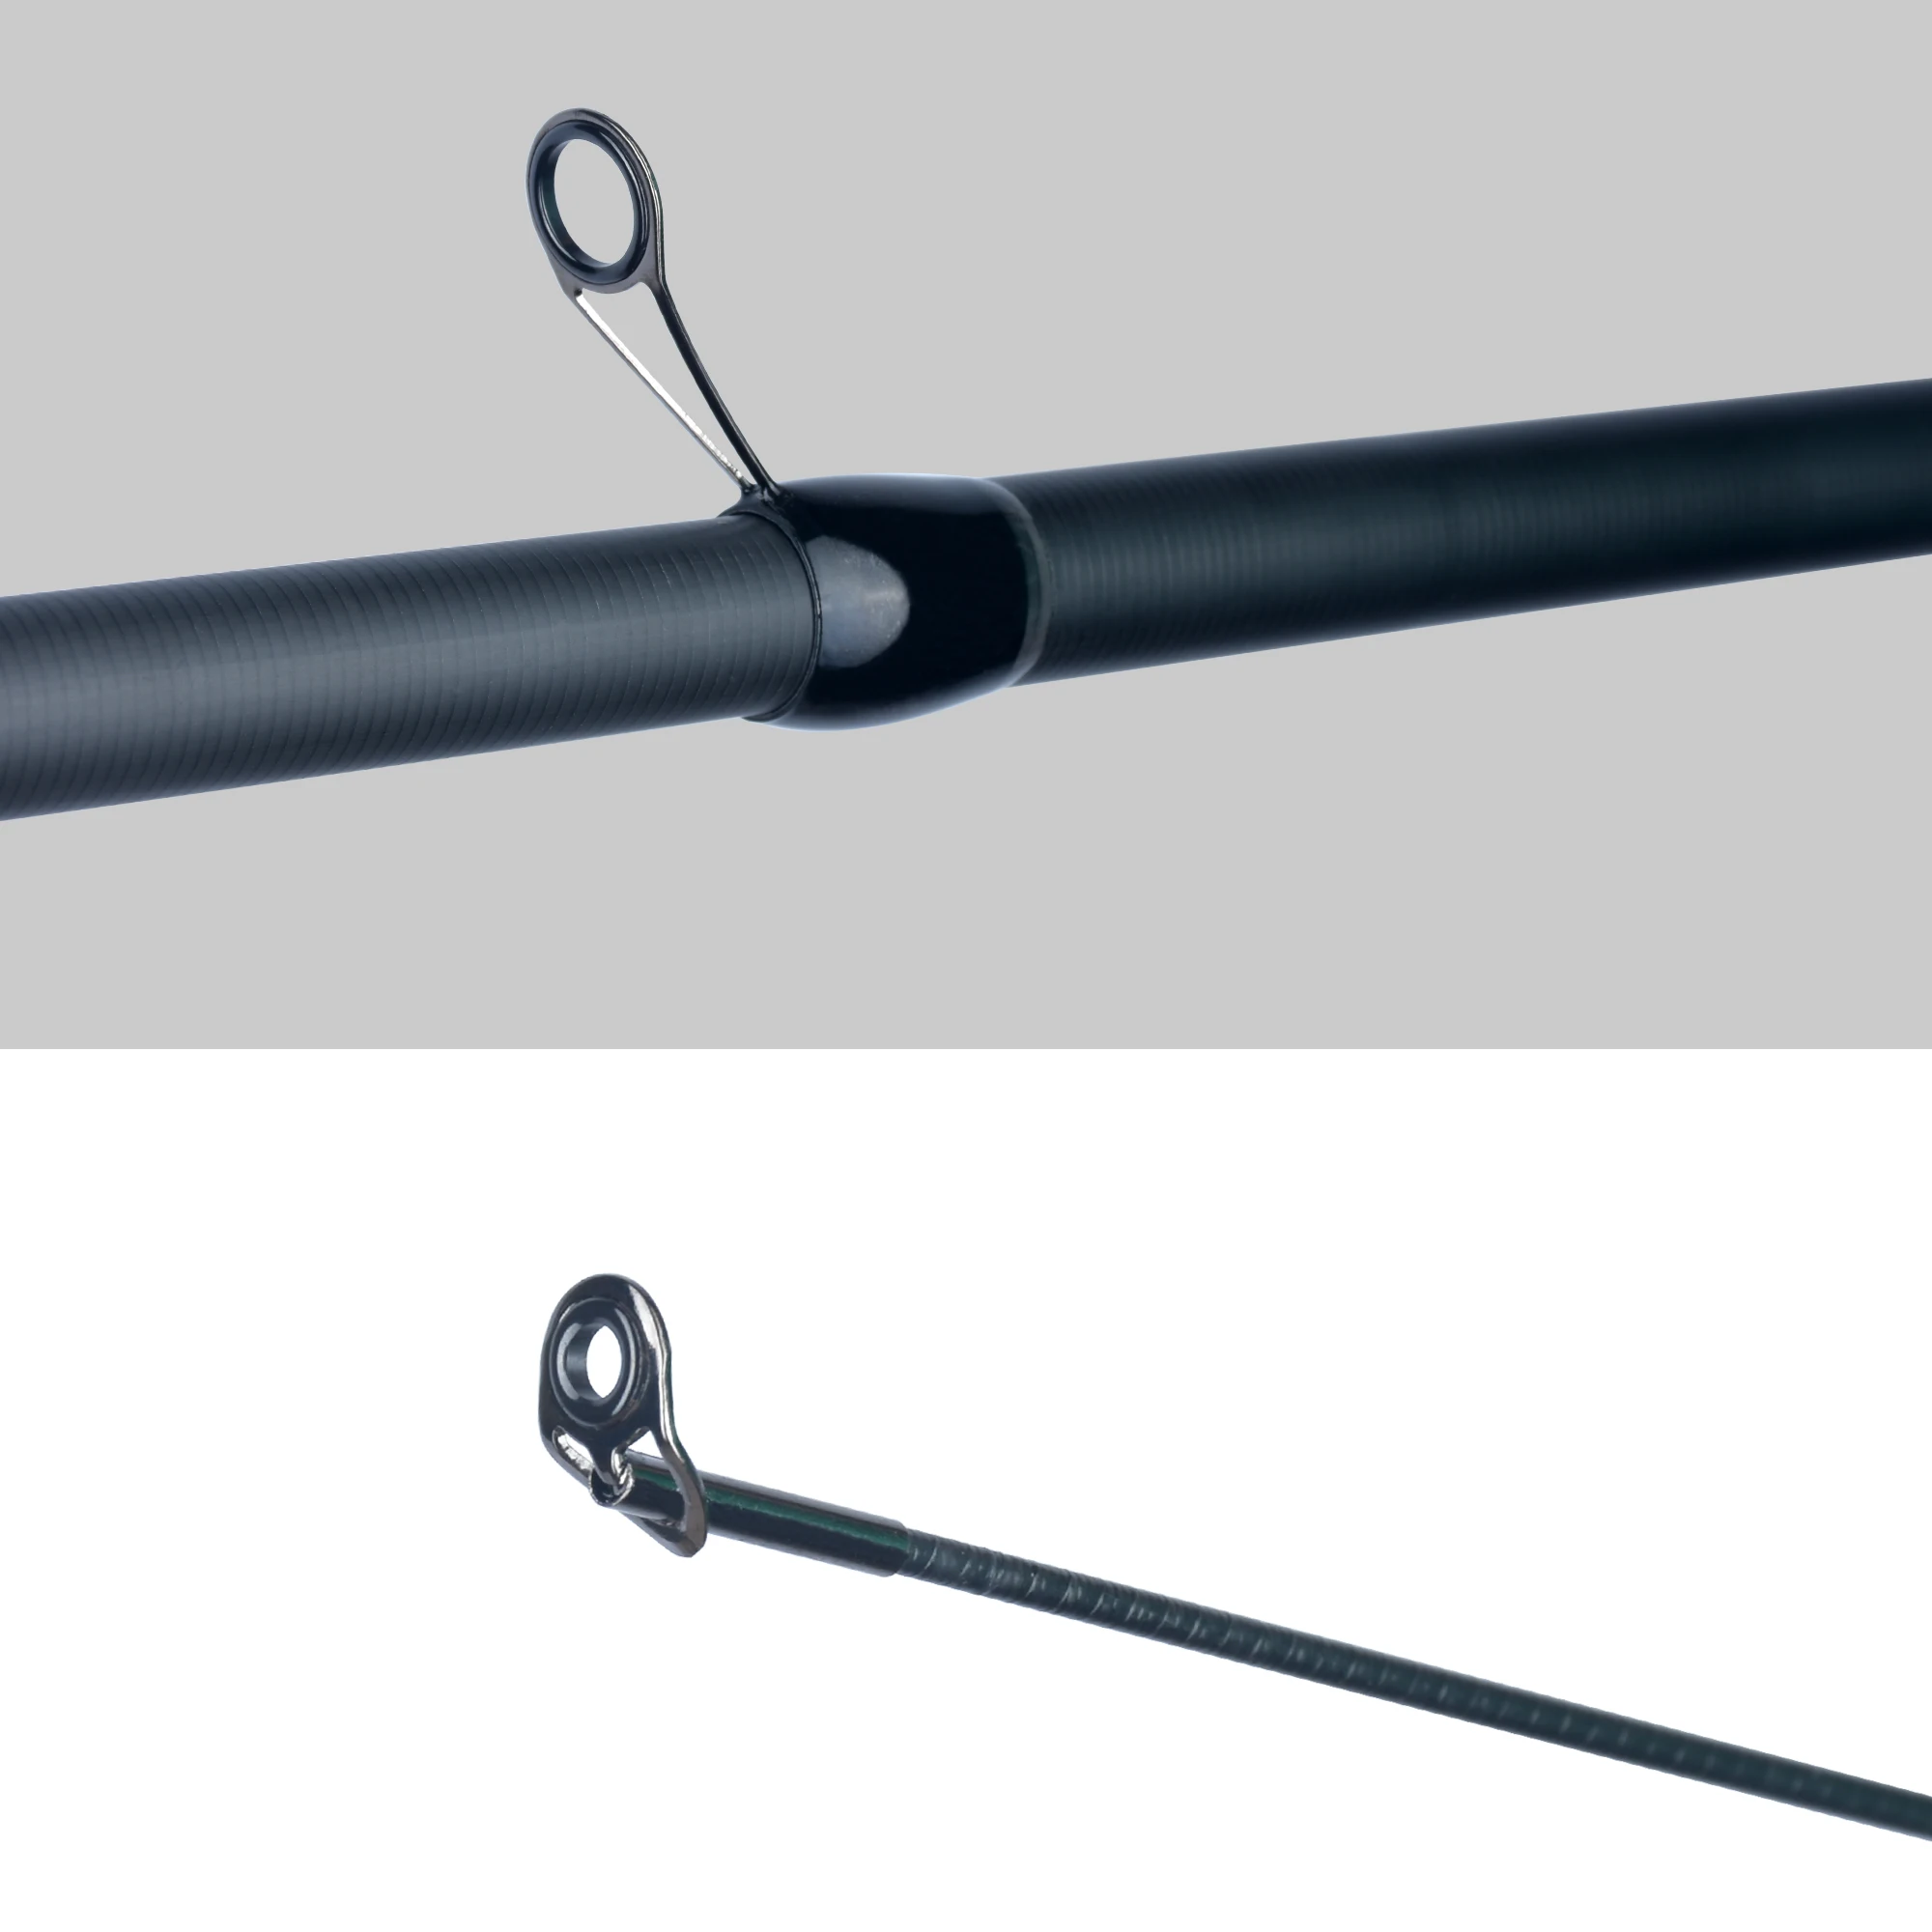 BUDEFO COMPETITIVE Telescopic Boat Casting Rod Ultra Light Spinning Float  For Bolognese, Trout, And More Carbon Travel Available In 4/4.5/5.6M Sizes  10 30 Model: 231102 From Mang09, $21.59